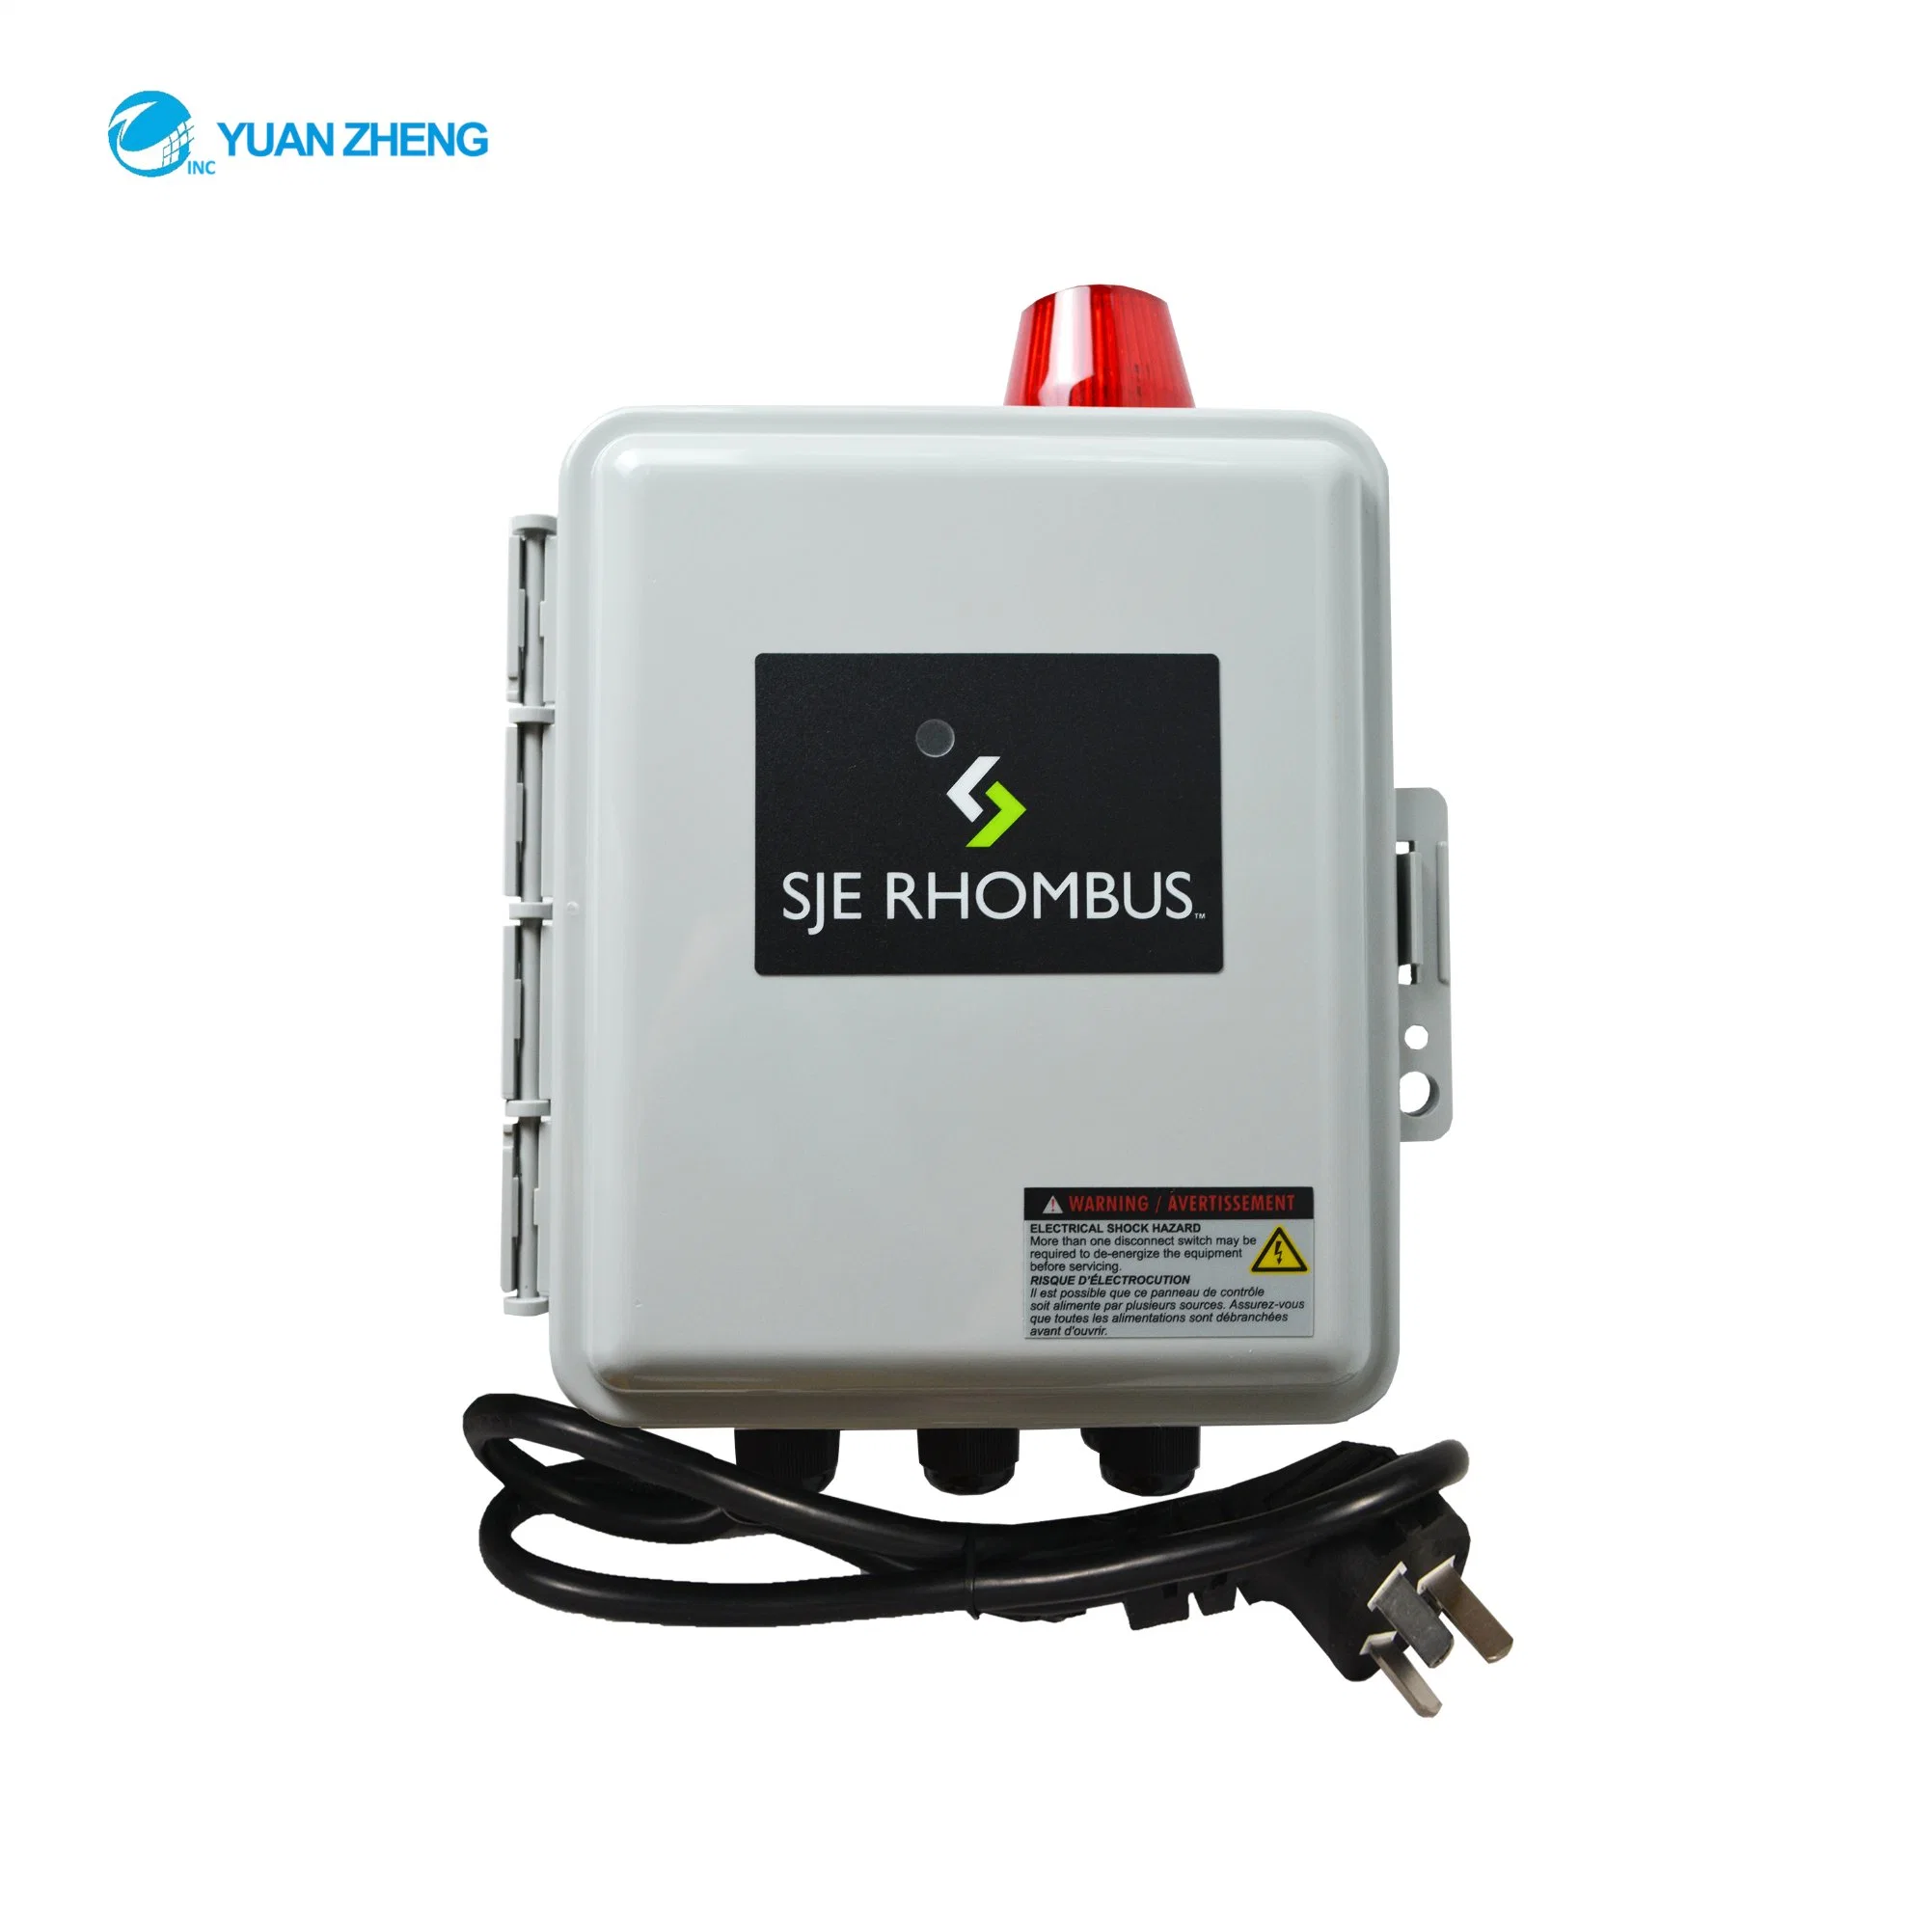 High Quality Smart Pump Control Box, Single Phase One Pump Control, Easy Operation, IP66 Protection Rate